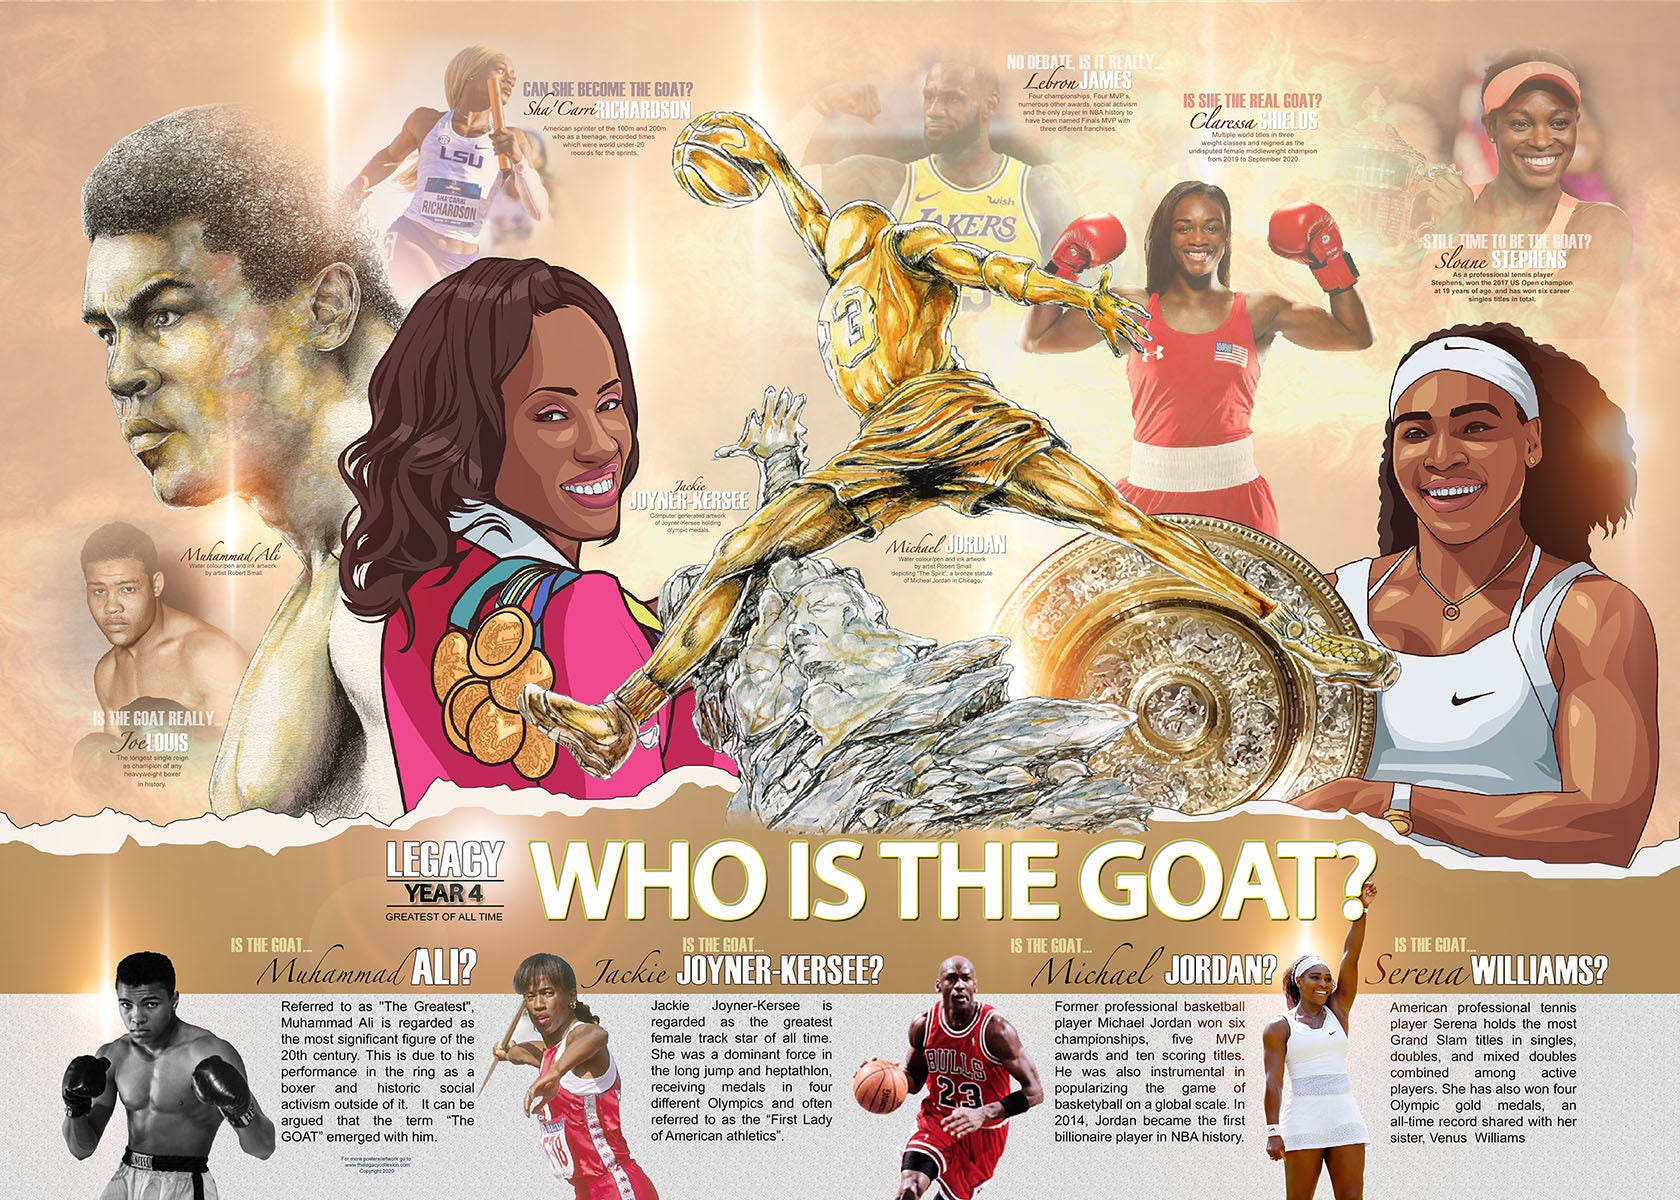 LEGACY-YEAR 4: Who is the G.O.A.T?